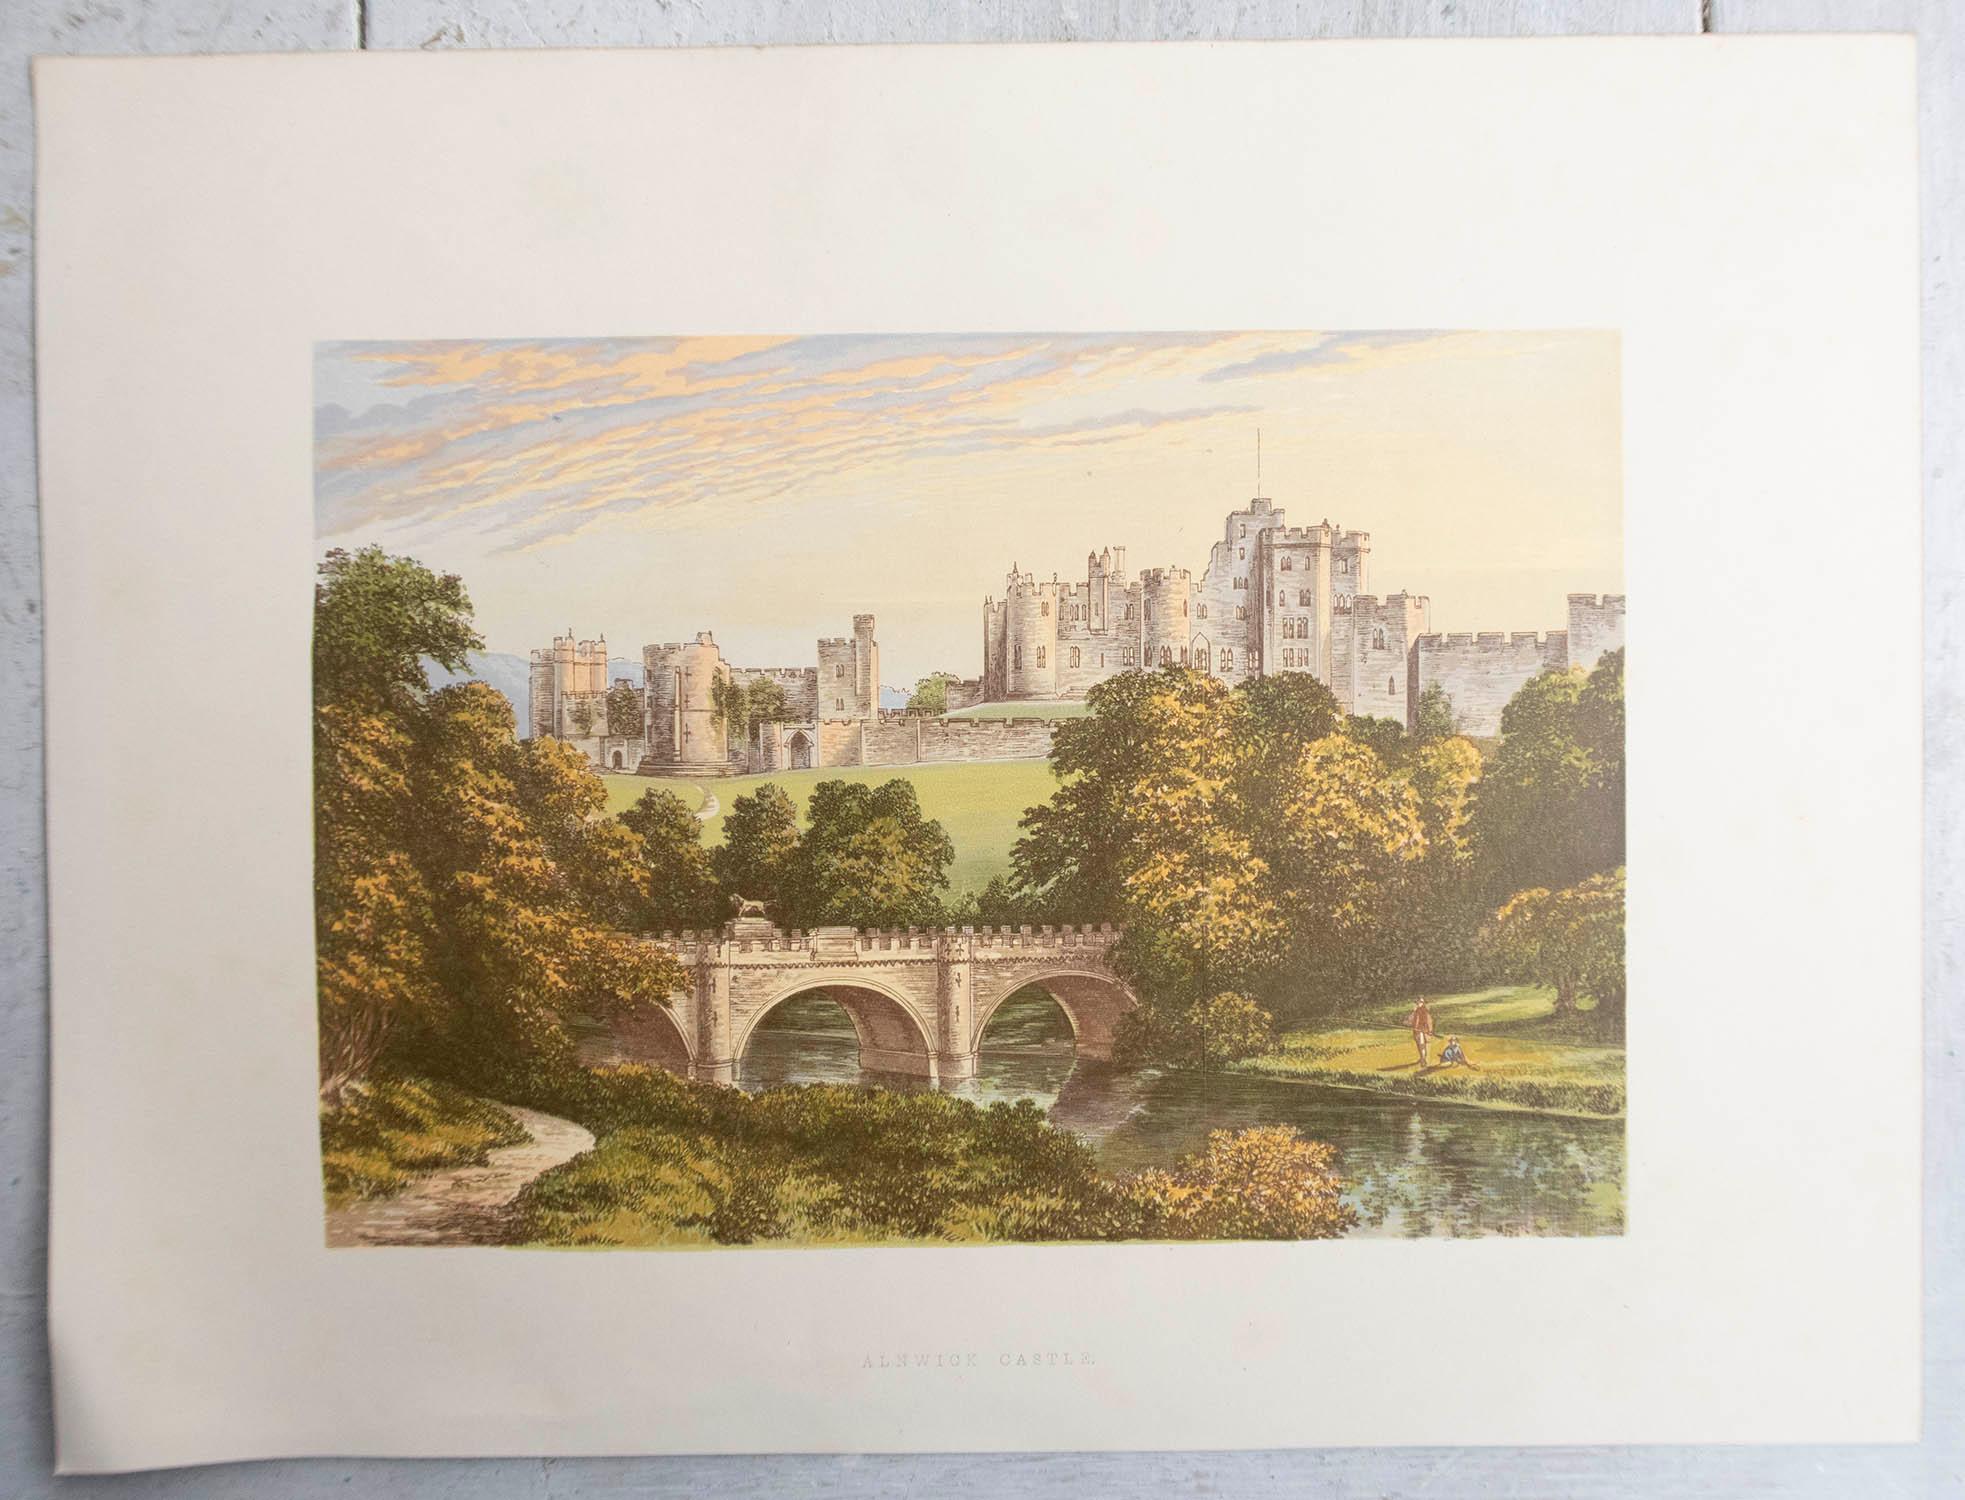 Set of 12 Original Antique Prints of English Castles, C.1880 In Good Condition For Sale In St Annes, Lancashire